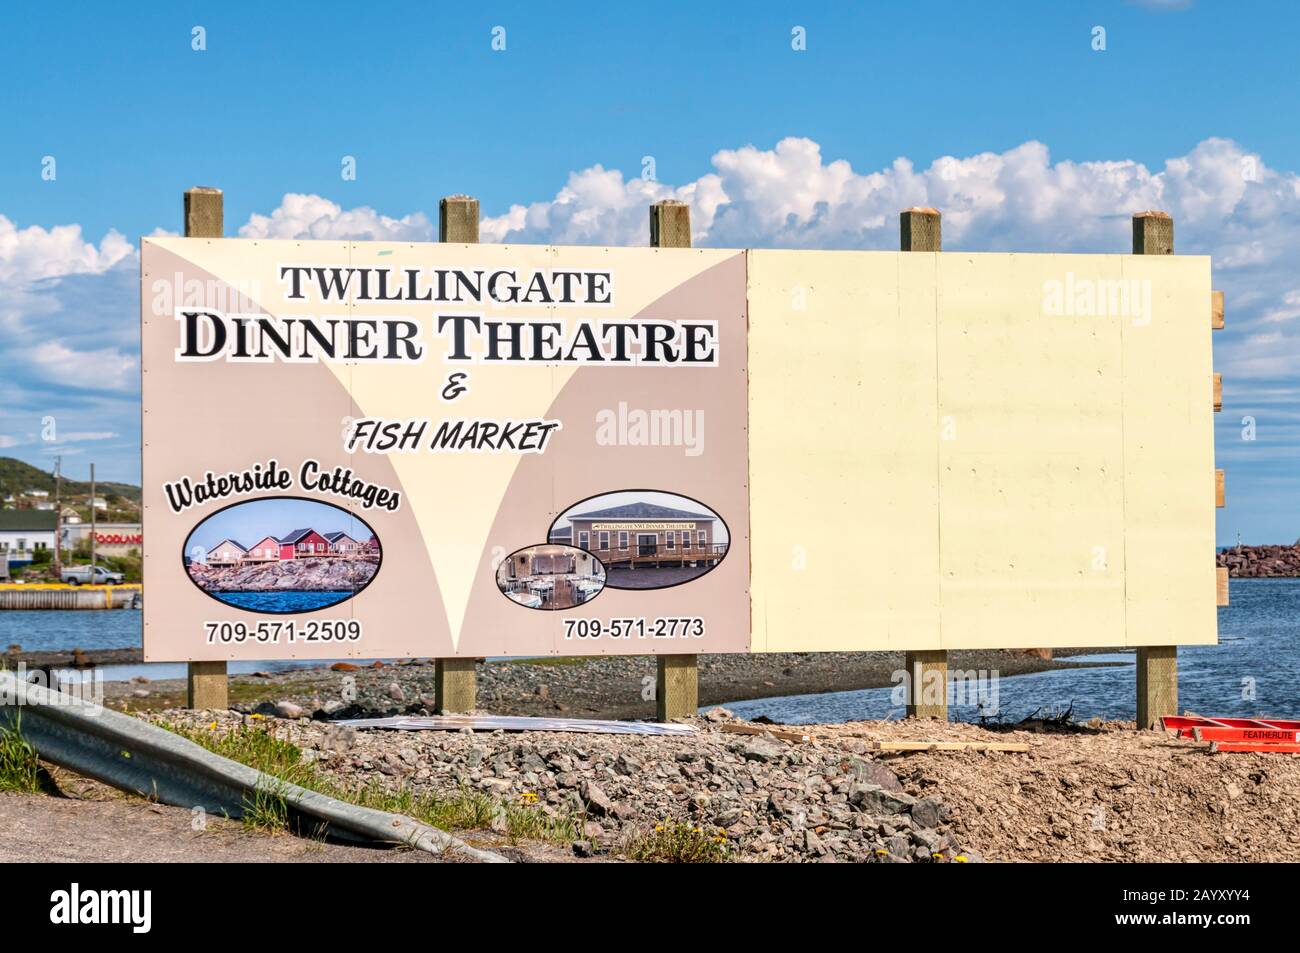 Sign for tourist attractions in Twillingate, Newfoundland.  Twillingate Dinner Theatre & fish market. Stock Photo